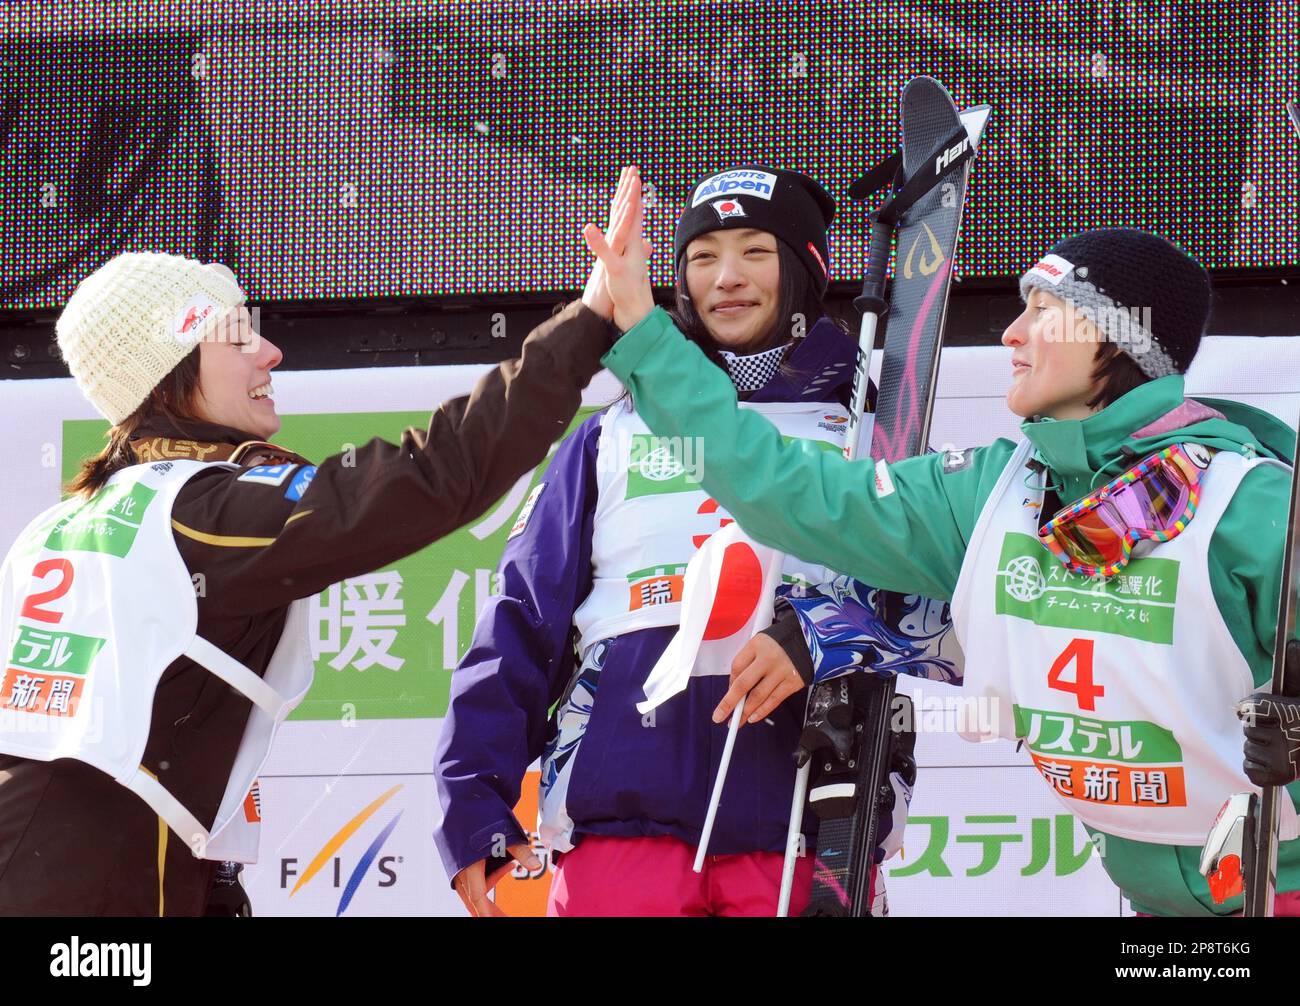 Winner Aiko Uemura of Japan, center, looks on as second-placed Jennifer Heil of Canada, left, and third-placed Nikola Sudova of Czech Republic, make high touch during the awarding ceremony for the women's moguls finals of the FIS Freestyle World Championships, in Inawashiro, Japan, Saturday, March 7, 2009. (AP Photo/Katsumi Kasahara) Stock Photo